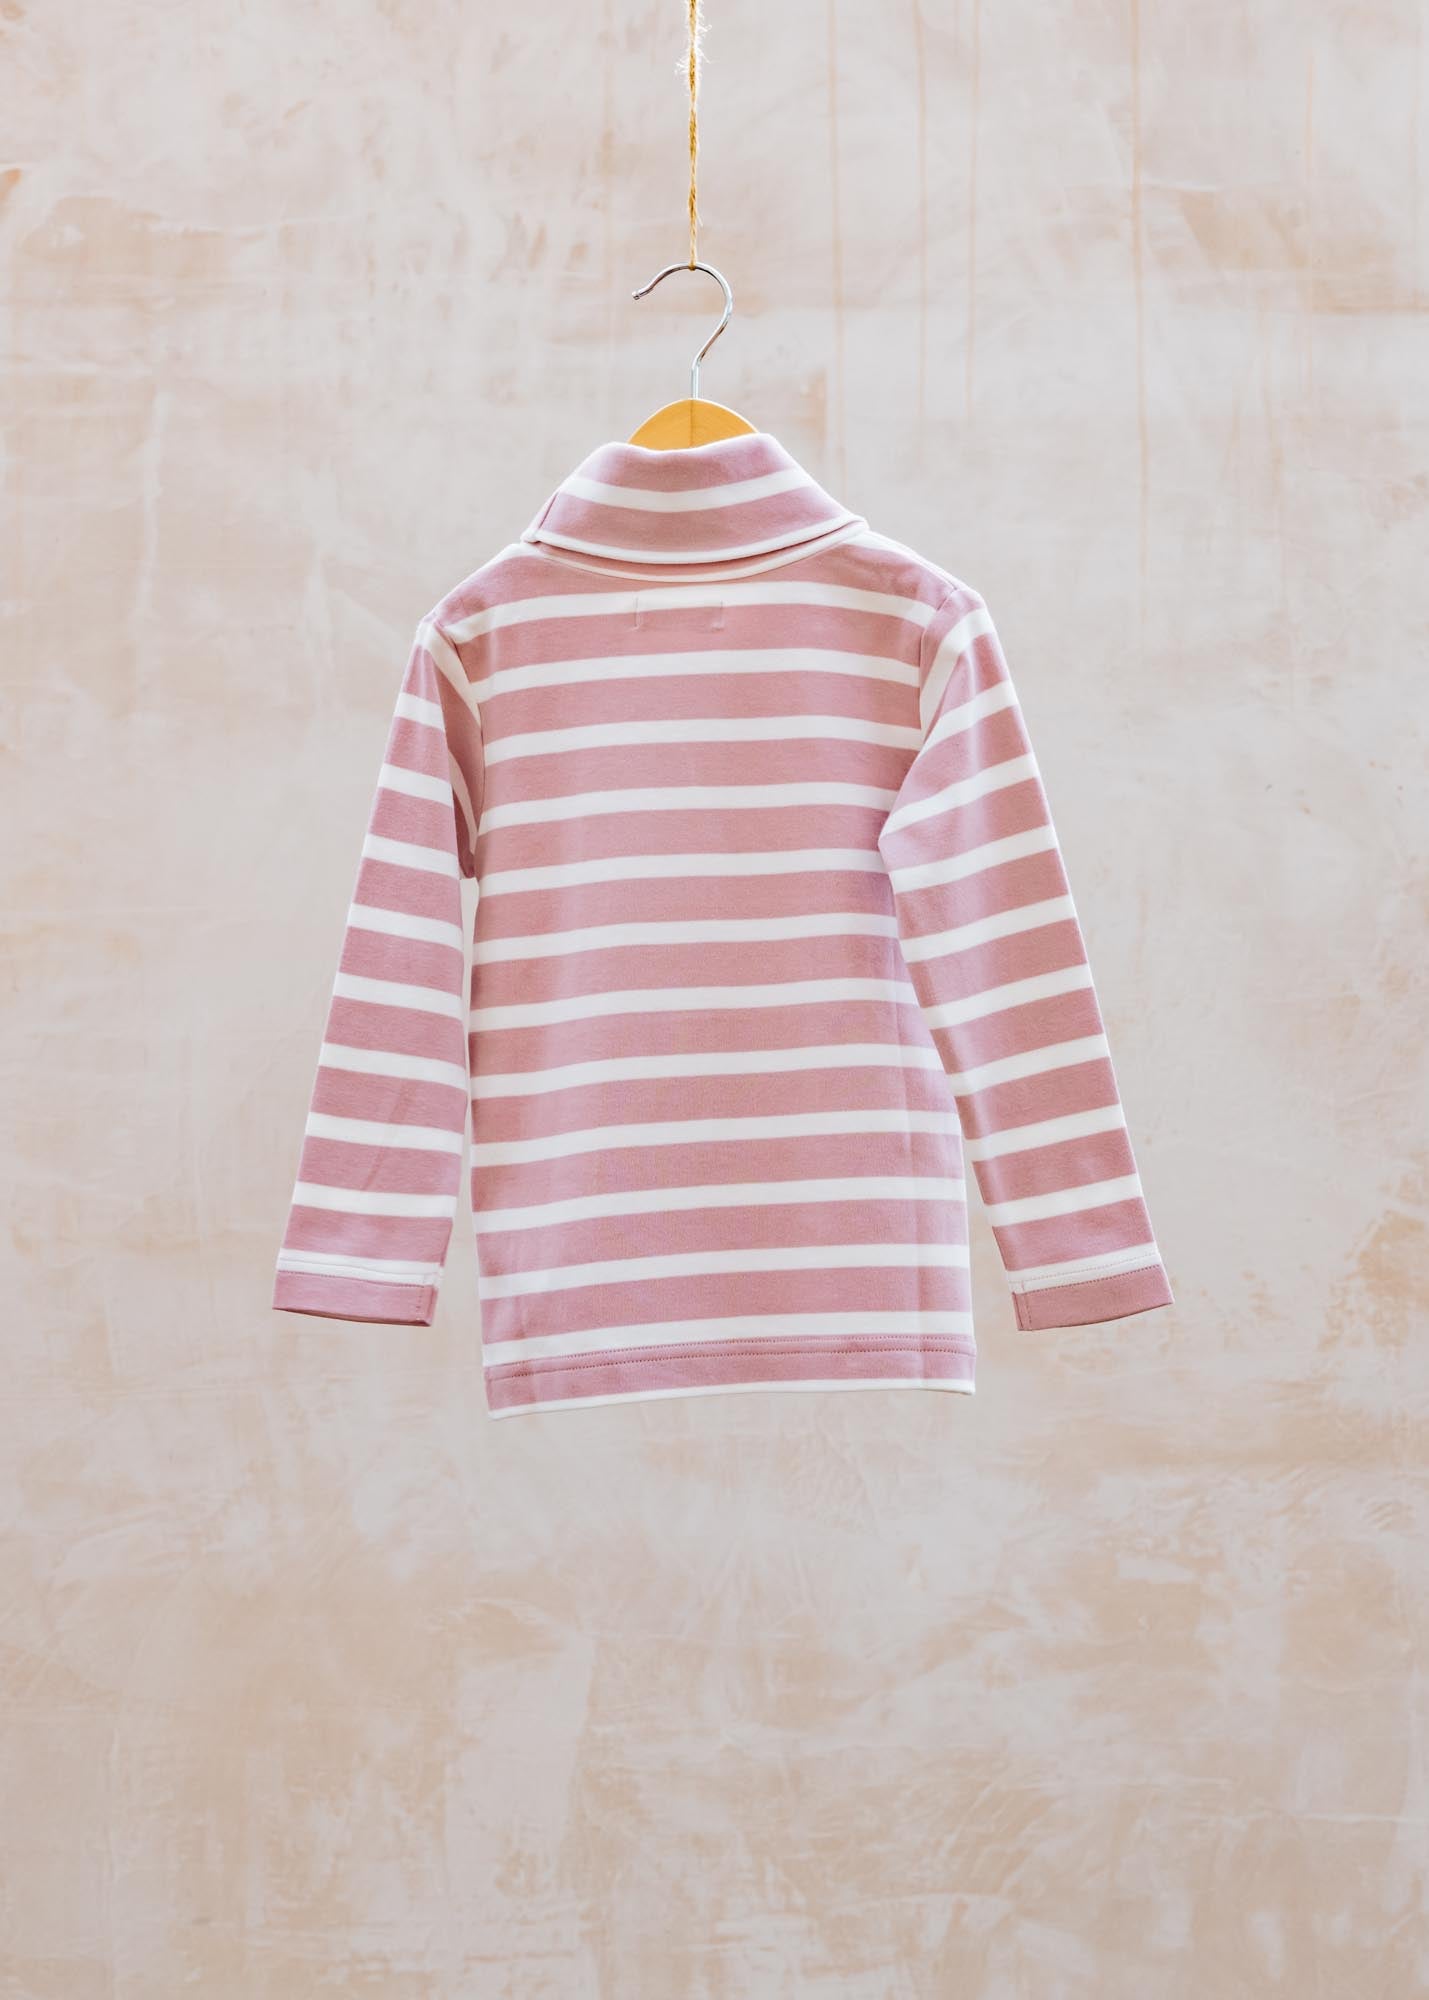 Pigeon Organics Children's Striped Polo Neck Top in Pink